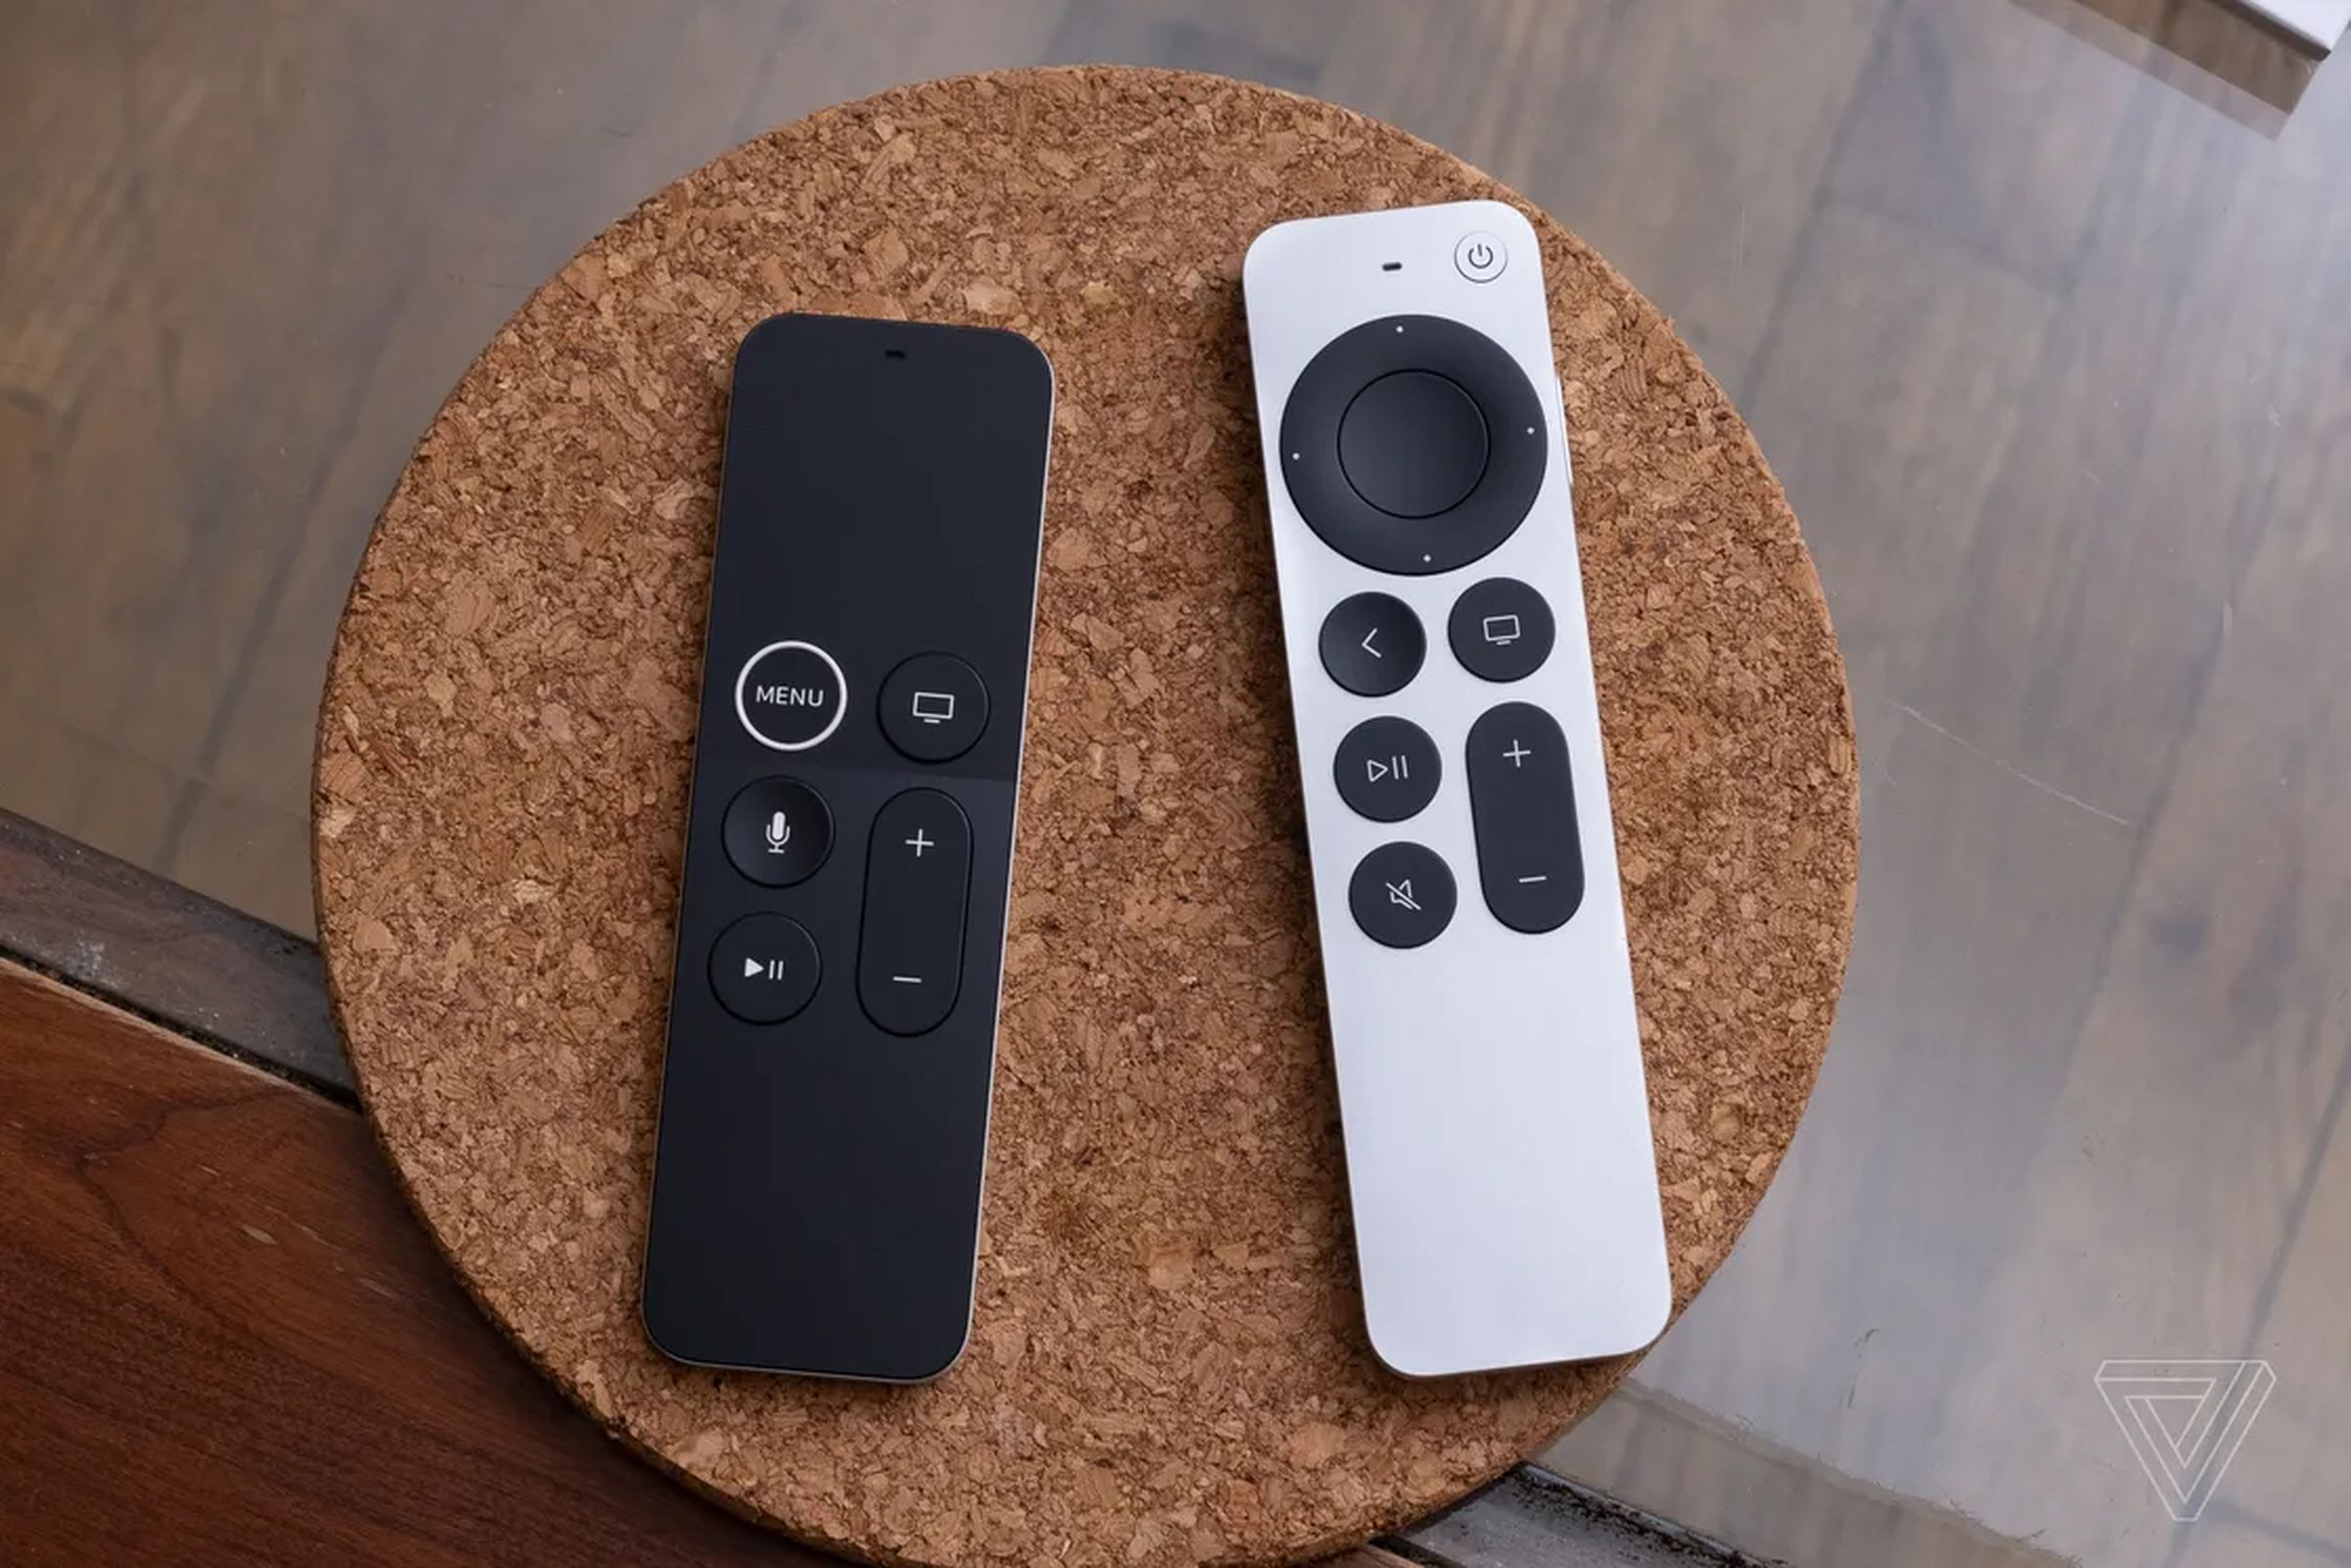 The first-generation Siri Remote is on the left, and the second-generation remote is on the right. 